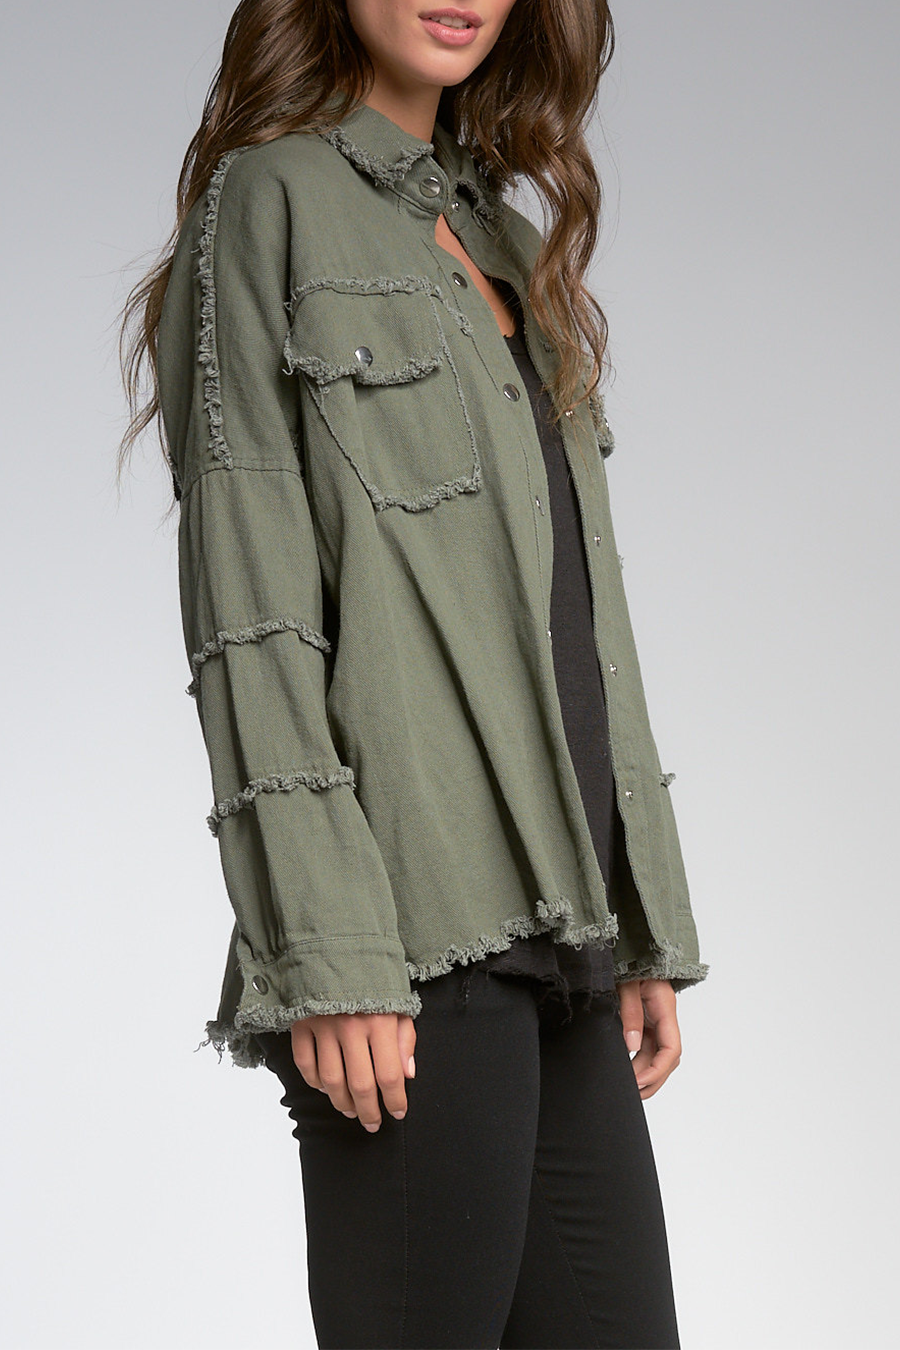 Distressed Rock & Roll Jacket | Olive - Main Image Number 2 of 3